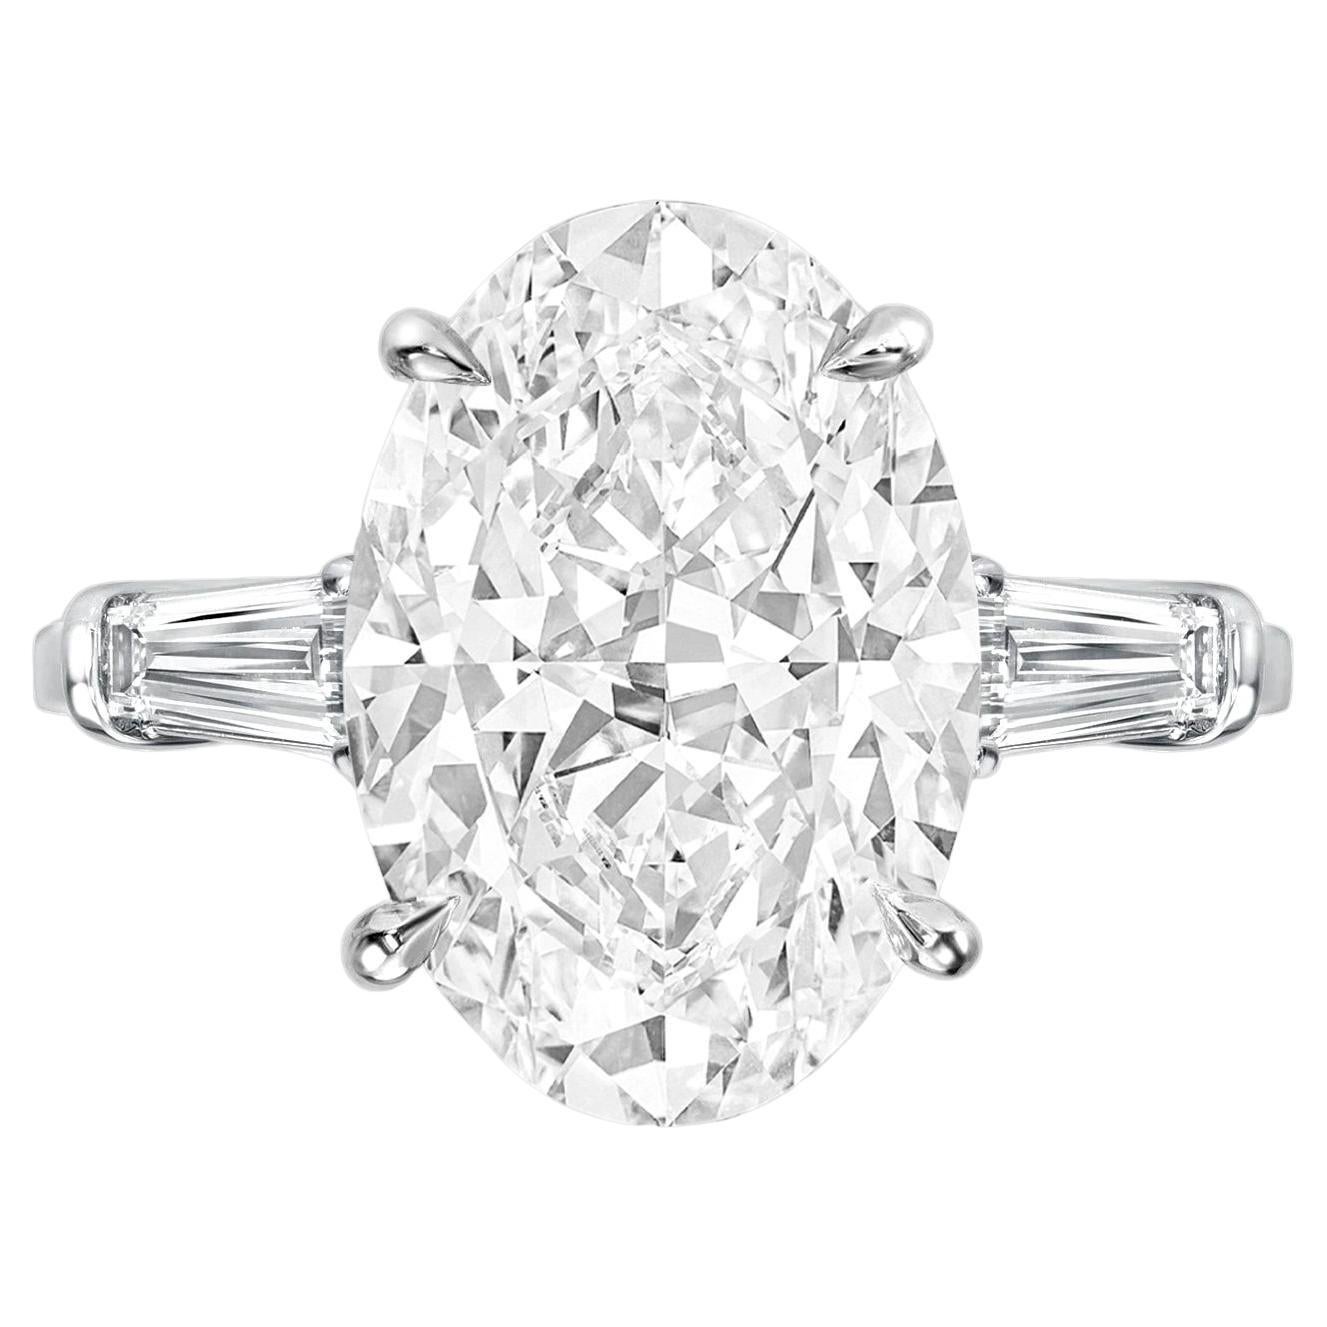 GIA Certified 4 Carat Oval Diamond Platinum Ring with tapered baguette